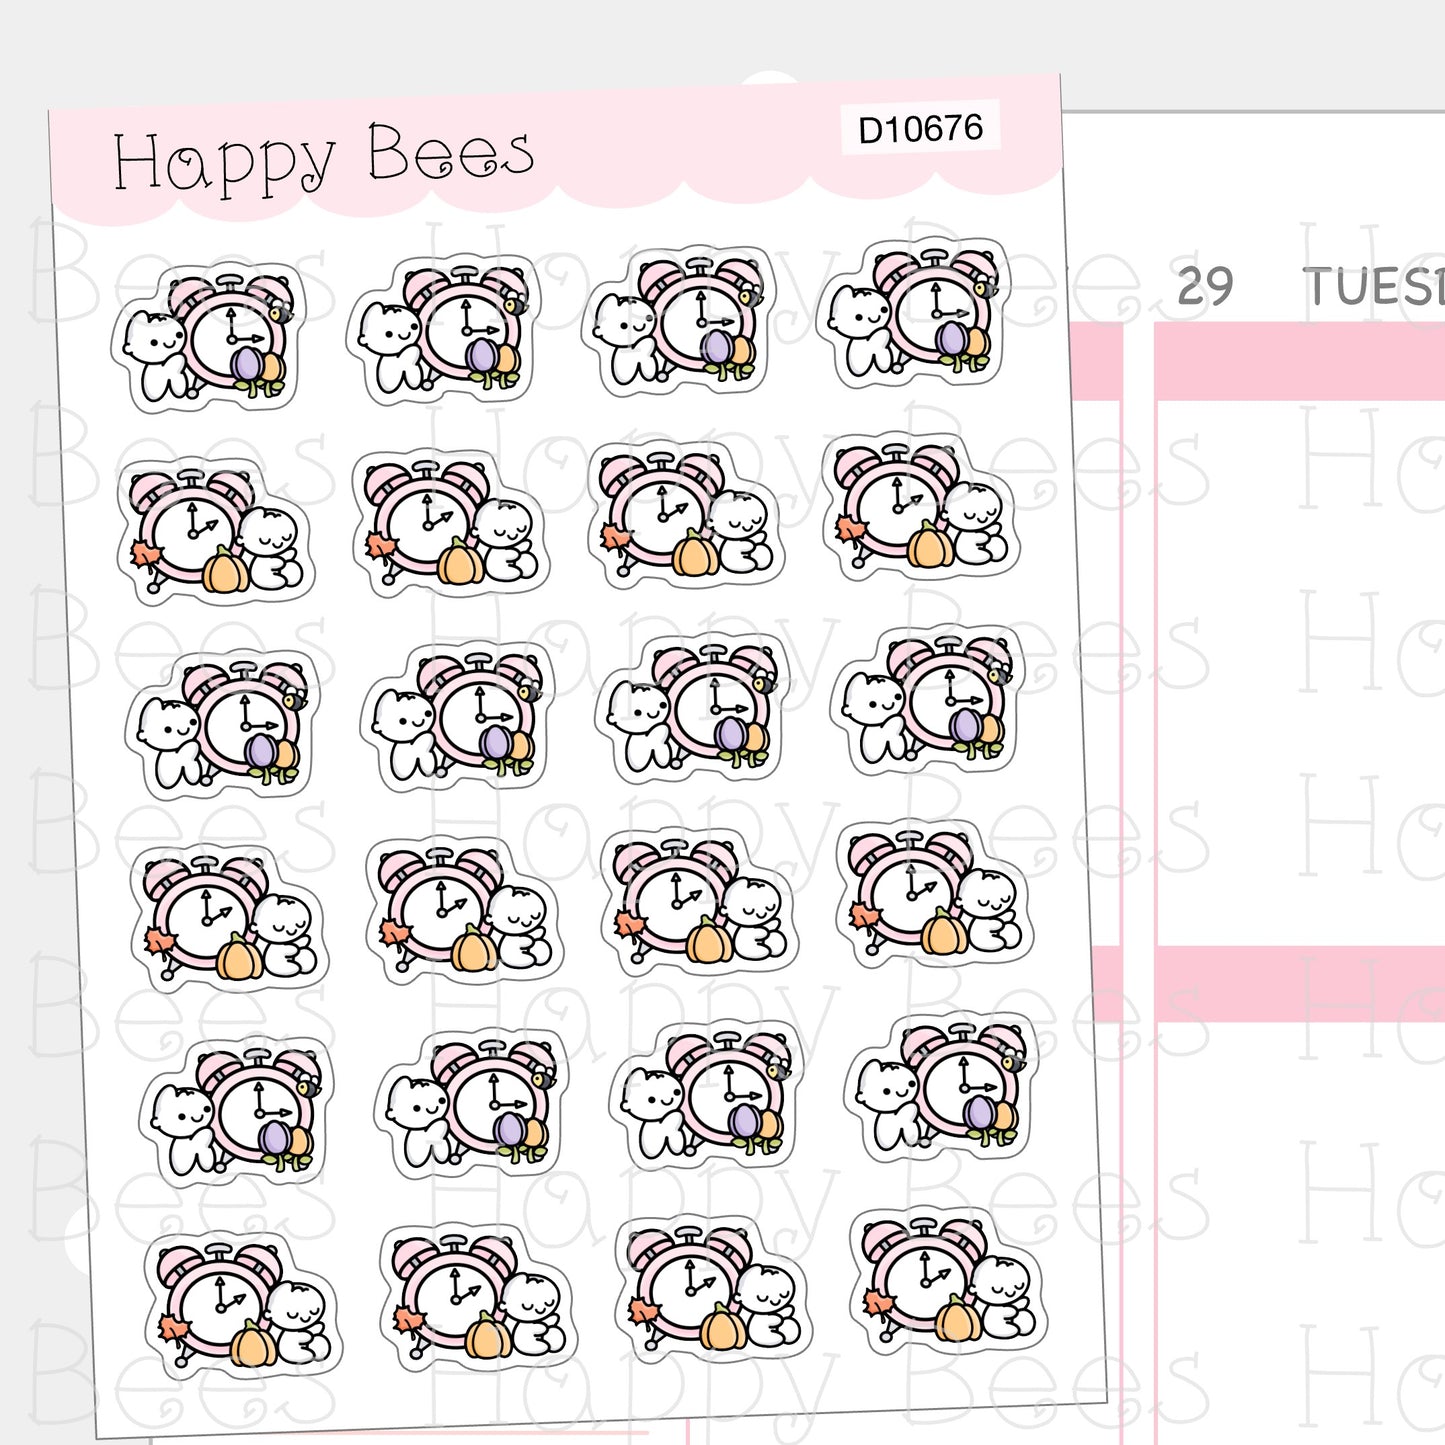 Spring Forward & Fall Back - Cute Doodles Functional Planner Stickers D10676